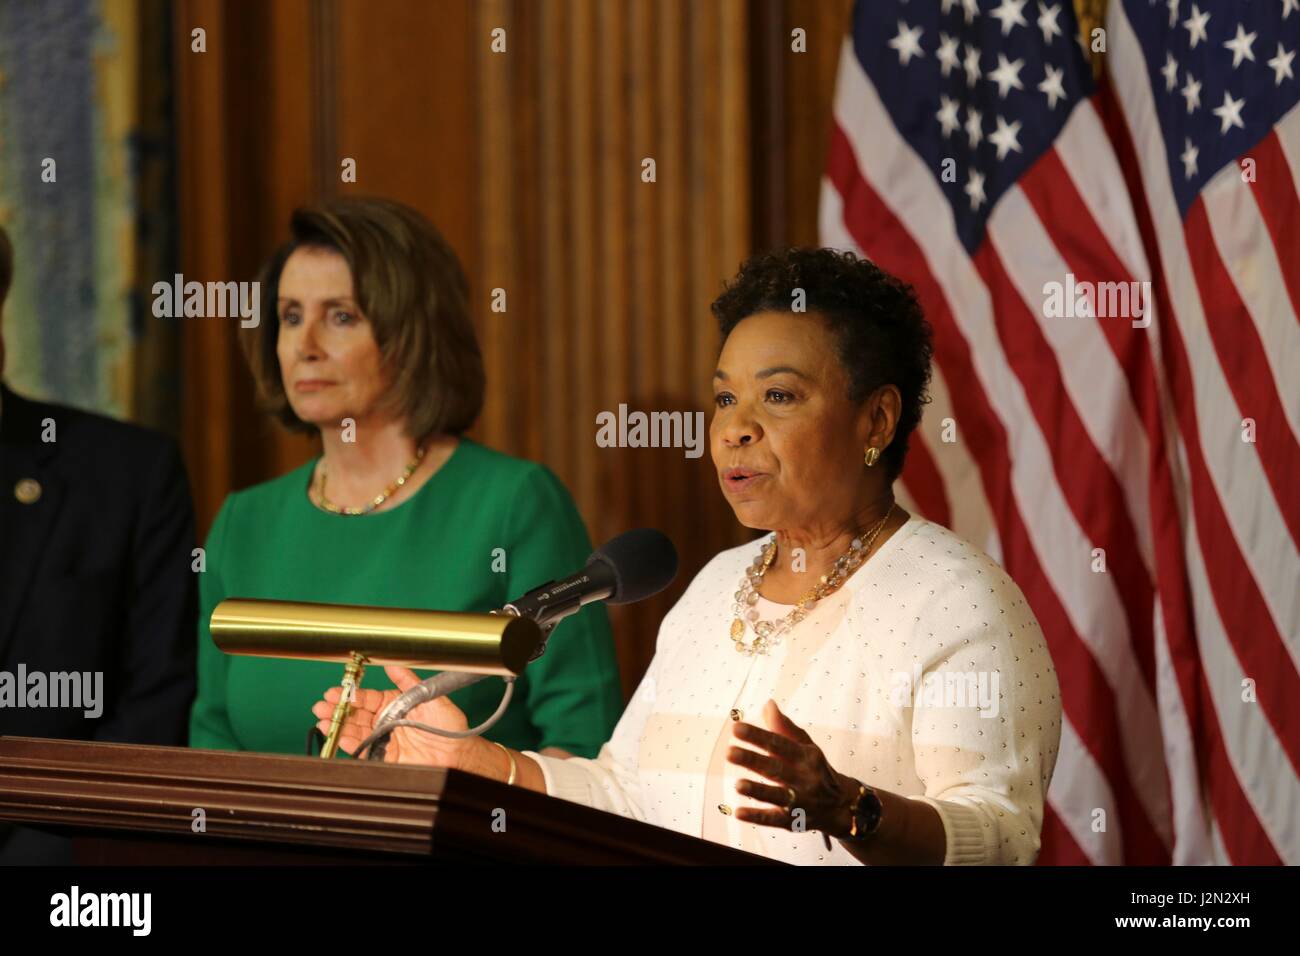 U.S. Congresswoman Rep. Barbara Lee of California joins Democrats to speak about President Donald Trump's first 100 days in office during a news conference on Capitol Hill April 28, 2017 in Washington, DC. Stock Photo